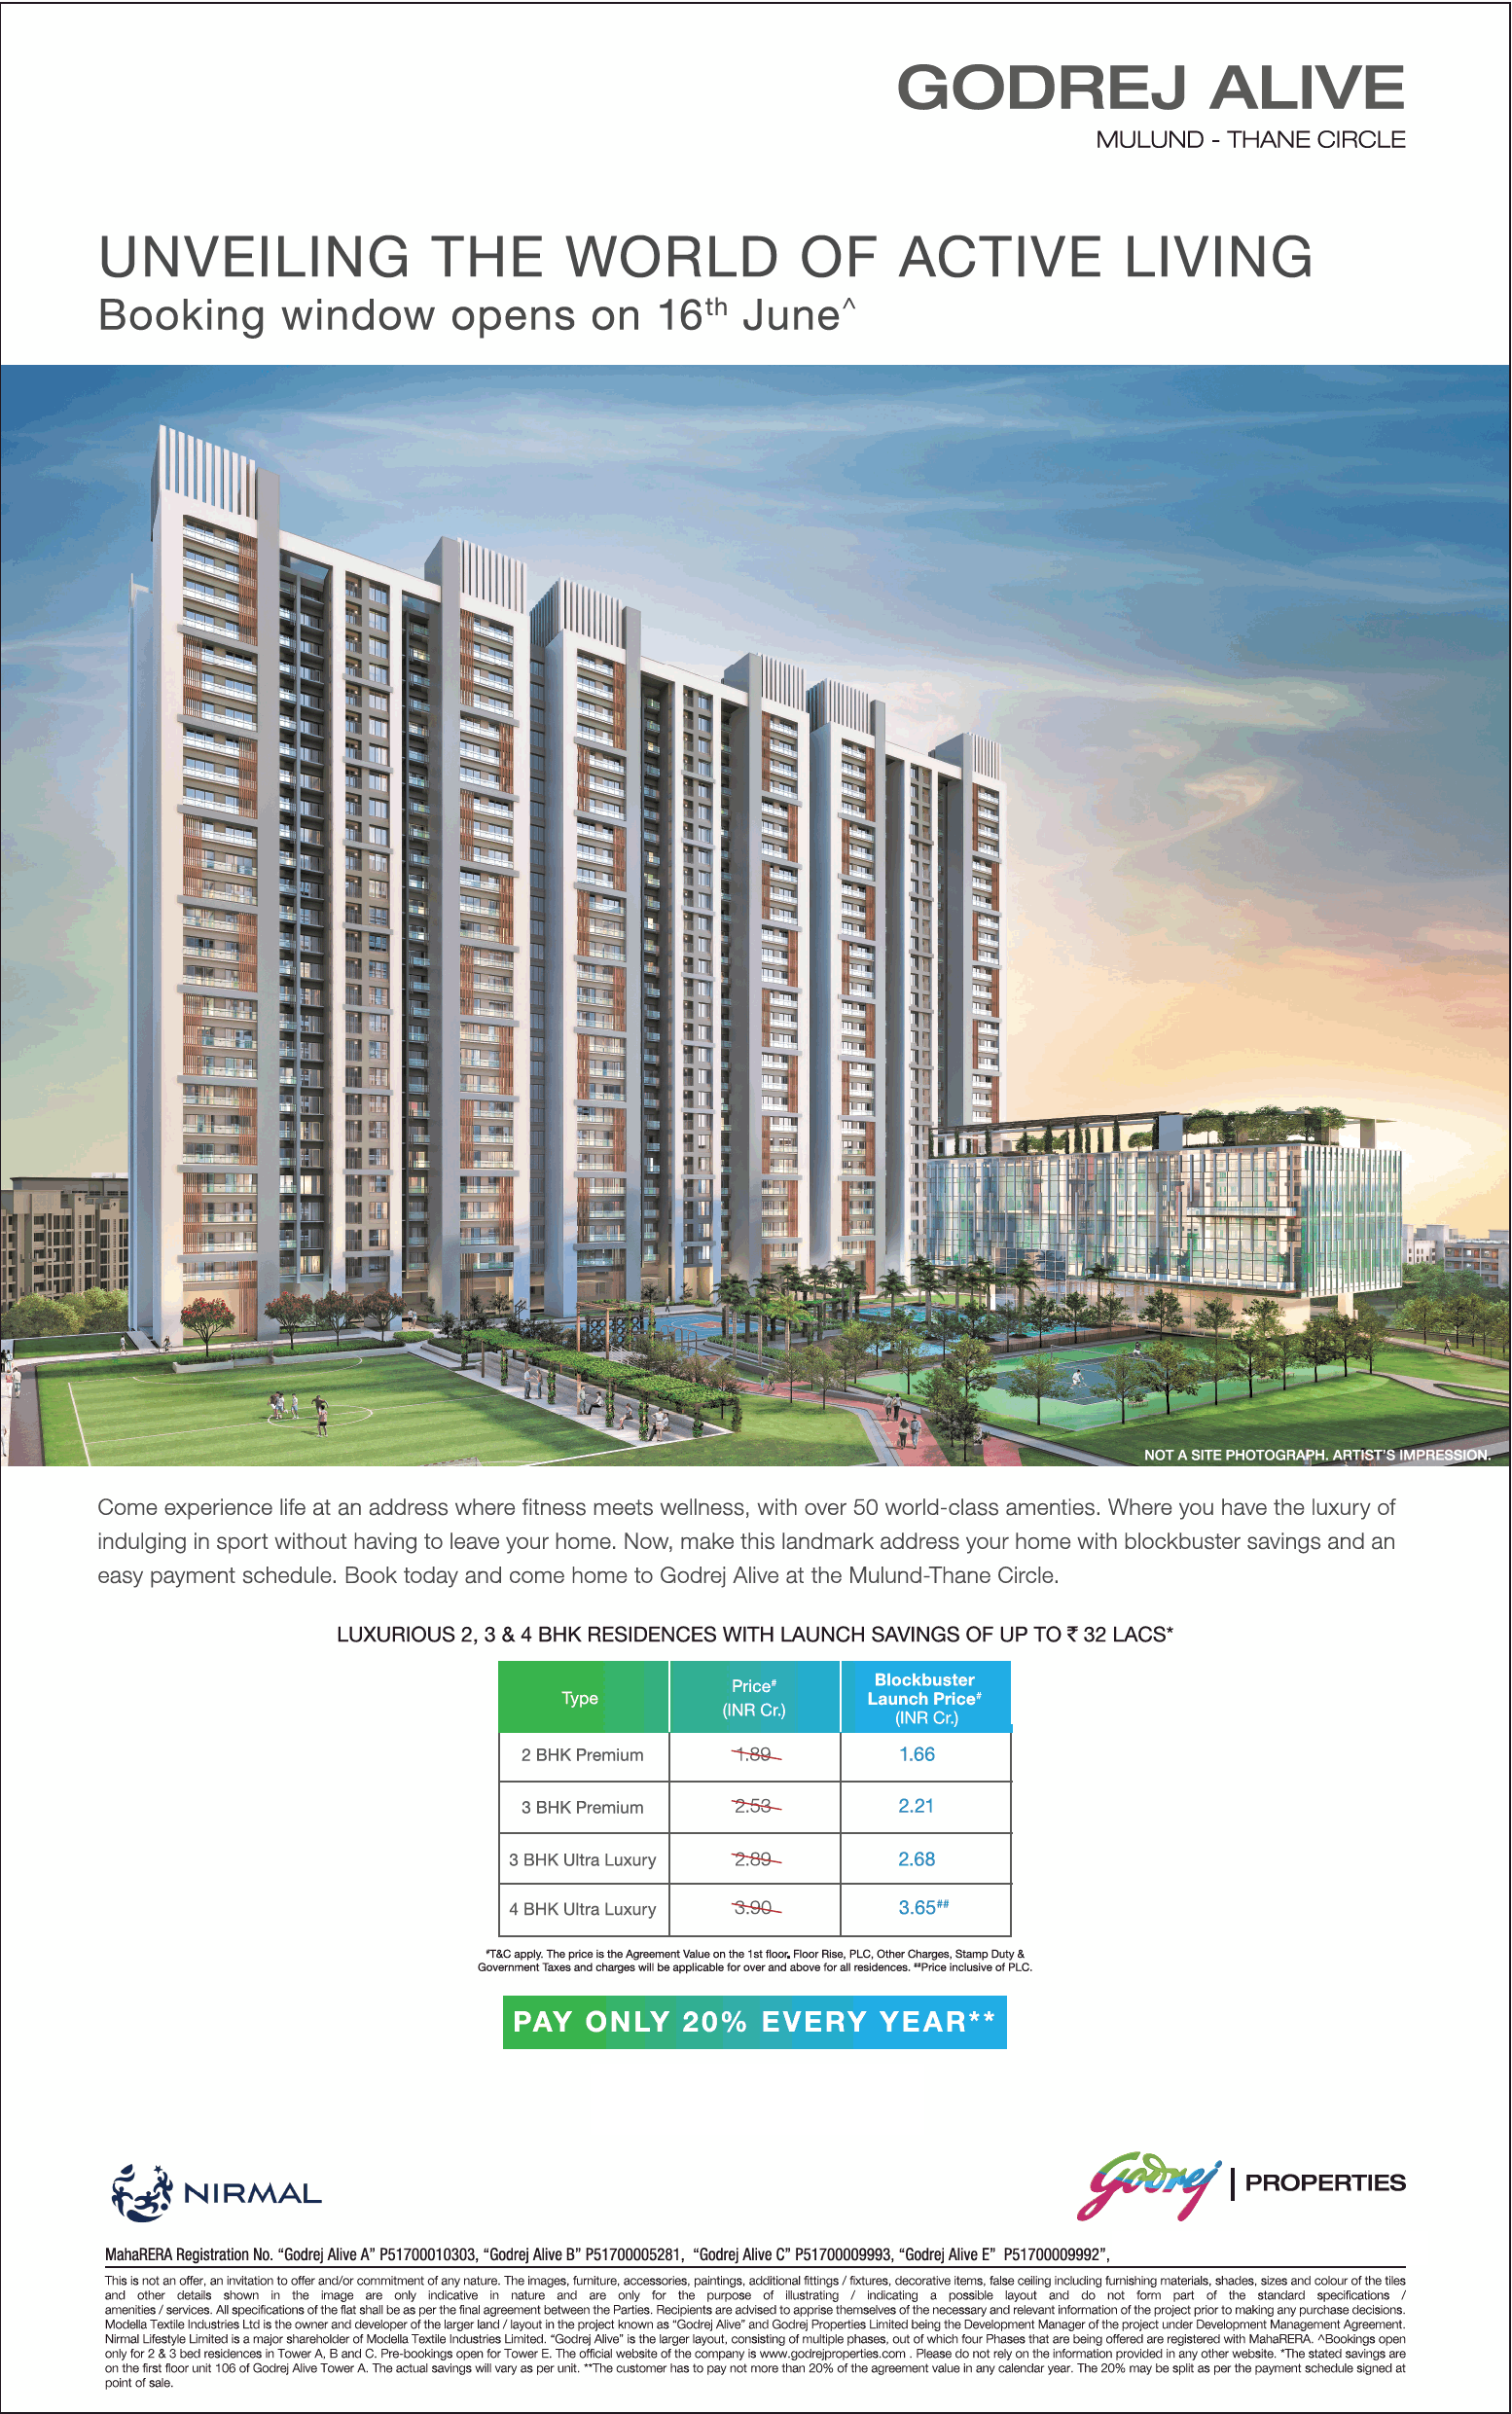 Book 2, 3, 4 bhk with launch savings up to 32 lacs at Godrej Alive in Mumbai Update